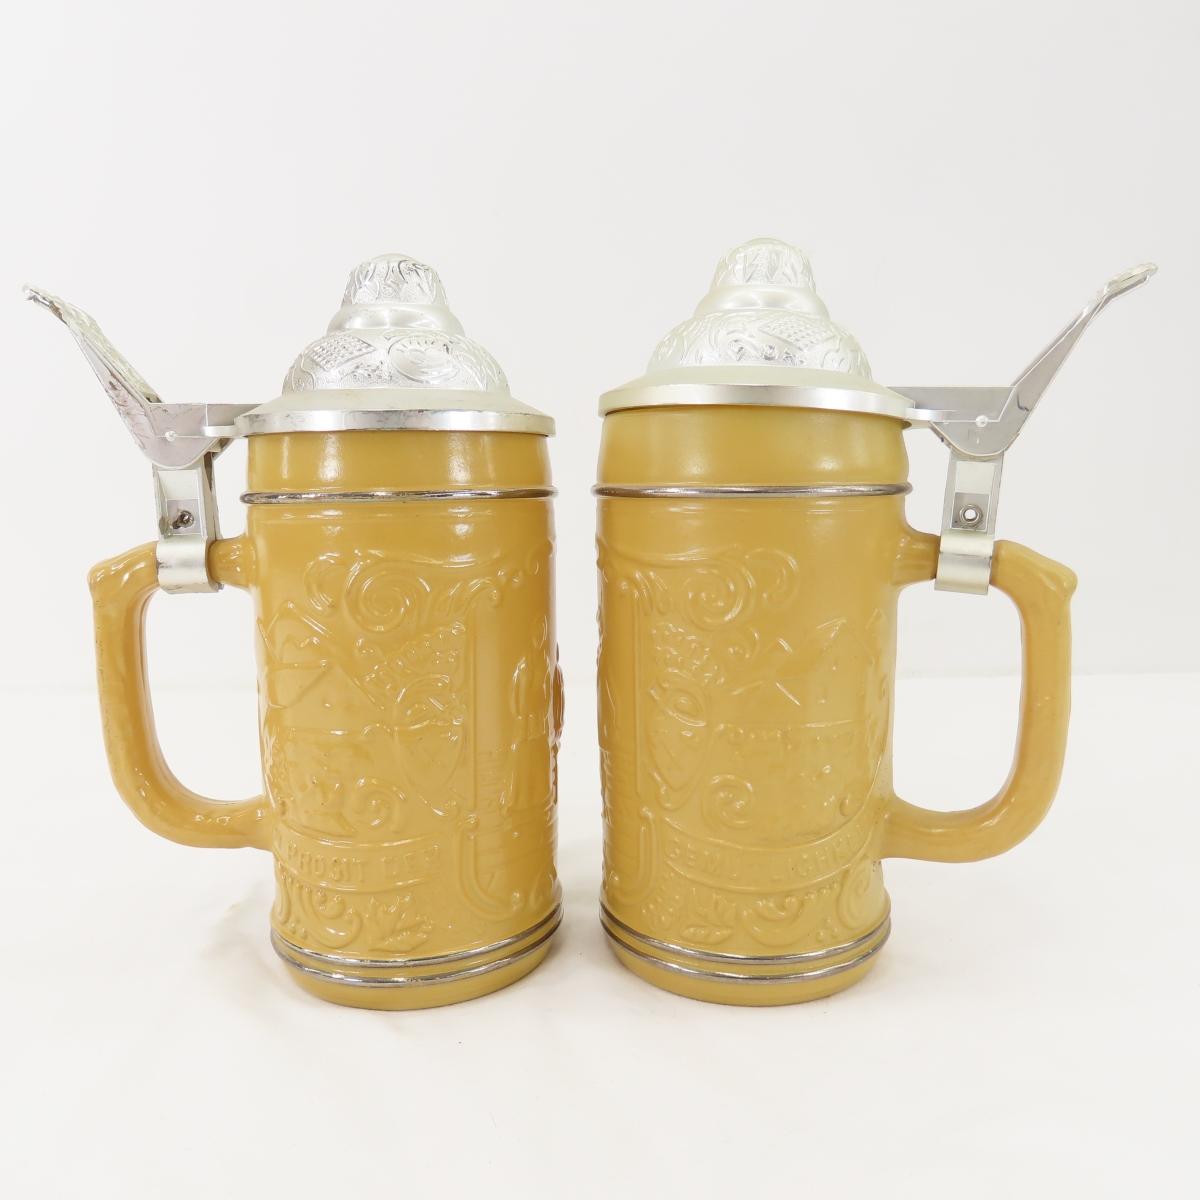 Glass and ceramic steins and bar glasses